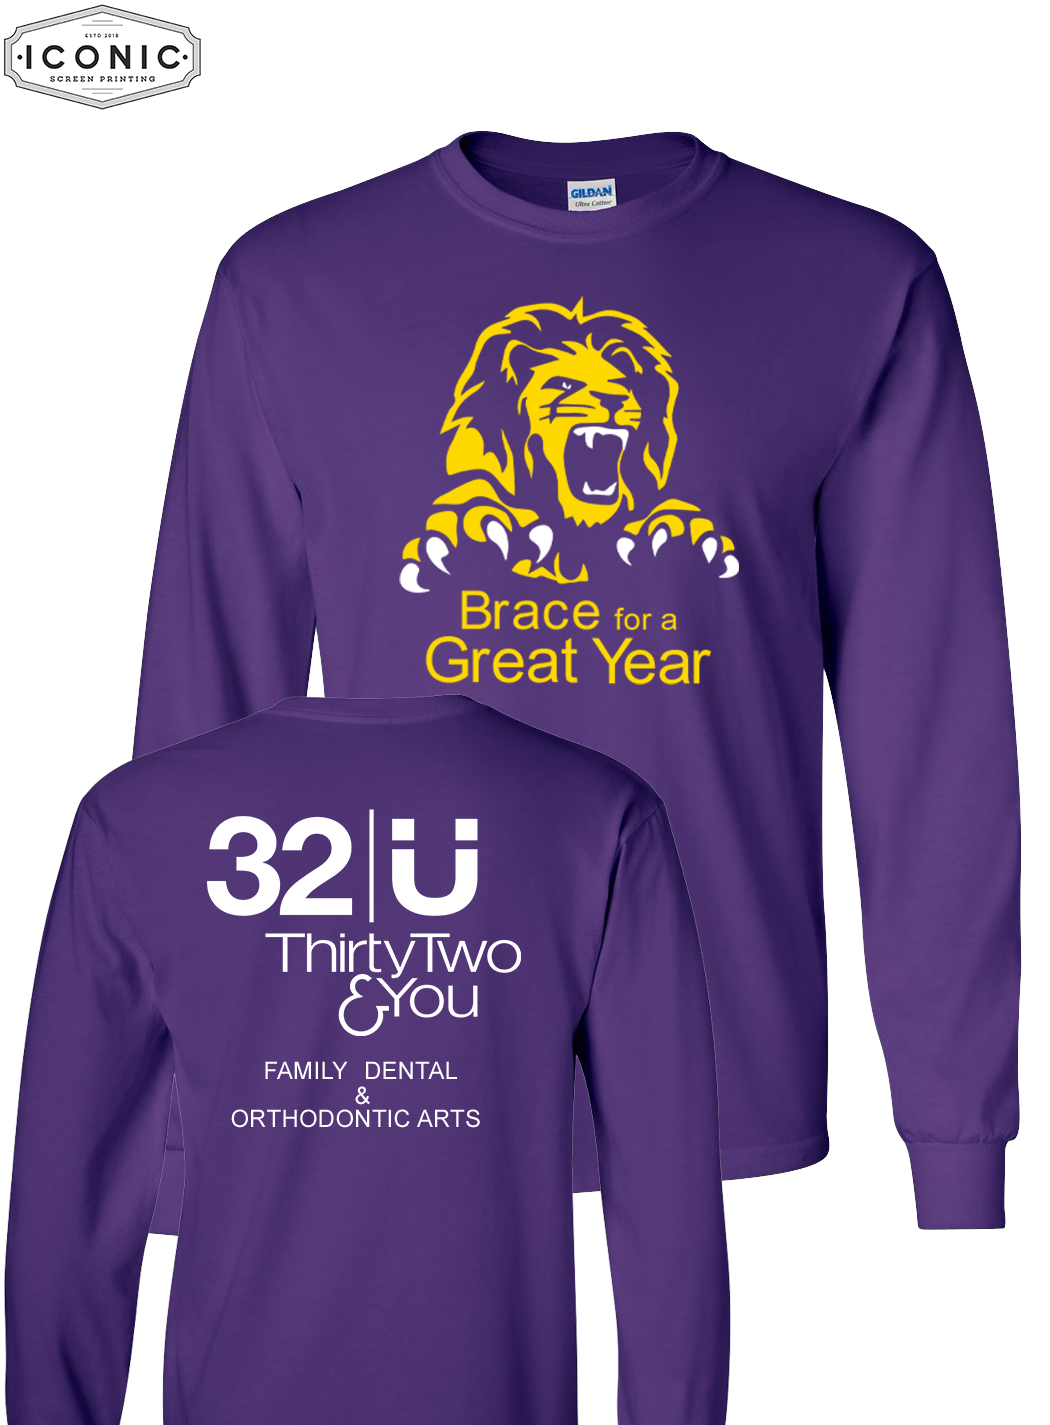 Brace for a Great Year - D5 - Ultra Cotton Long Sleeve